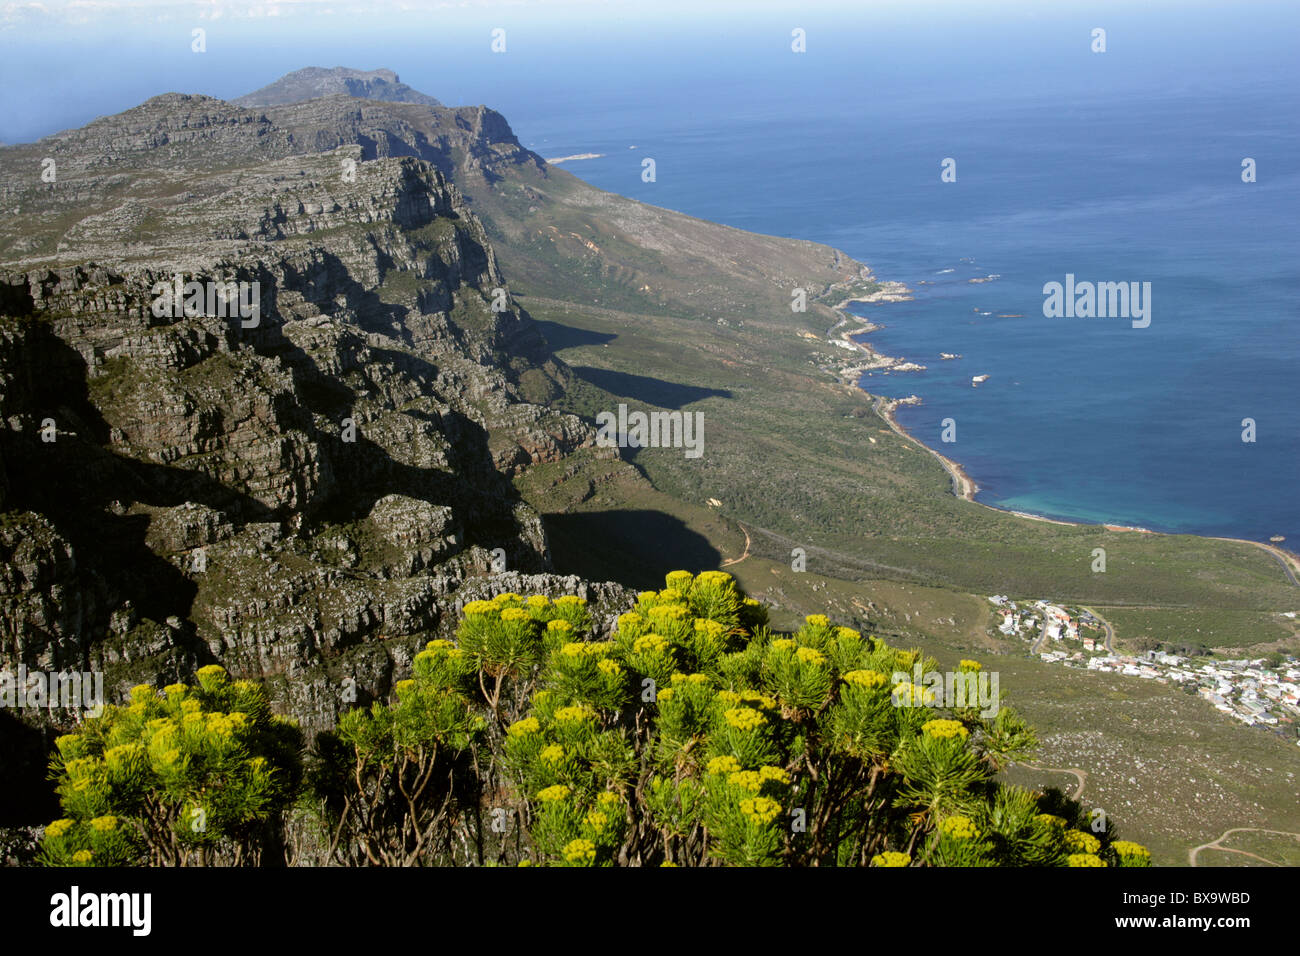 View Over Camps Bay from Table Mountain, Cape Town, Western Cape, South Africa. Golden Coulter Bush, Hymenolepis parviflora. Stock Photo